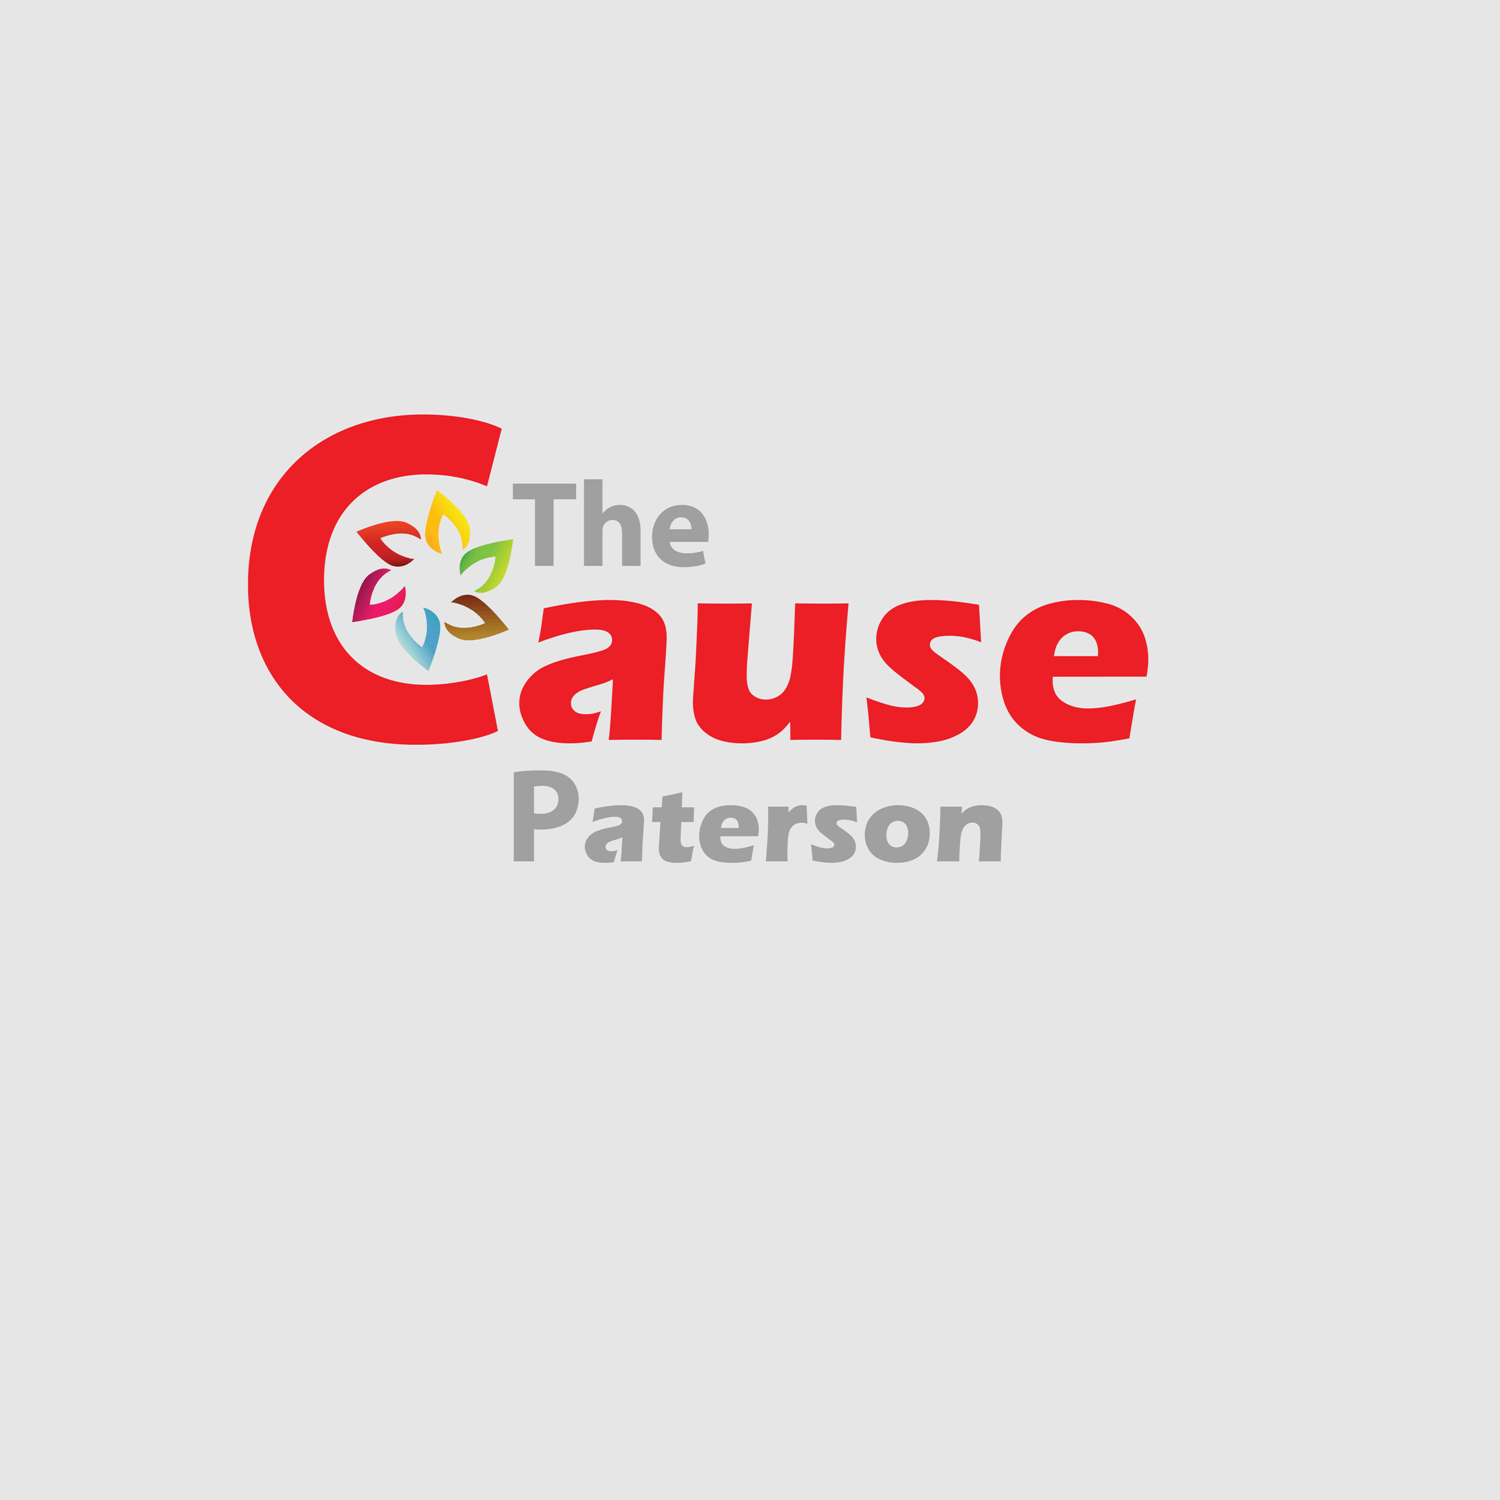 Paterson Logo - Masculine, Serious Logo Design for The Cause Paterson by Santosh153 ...